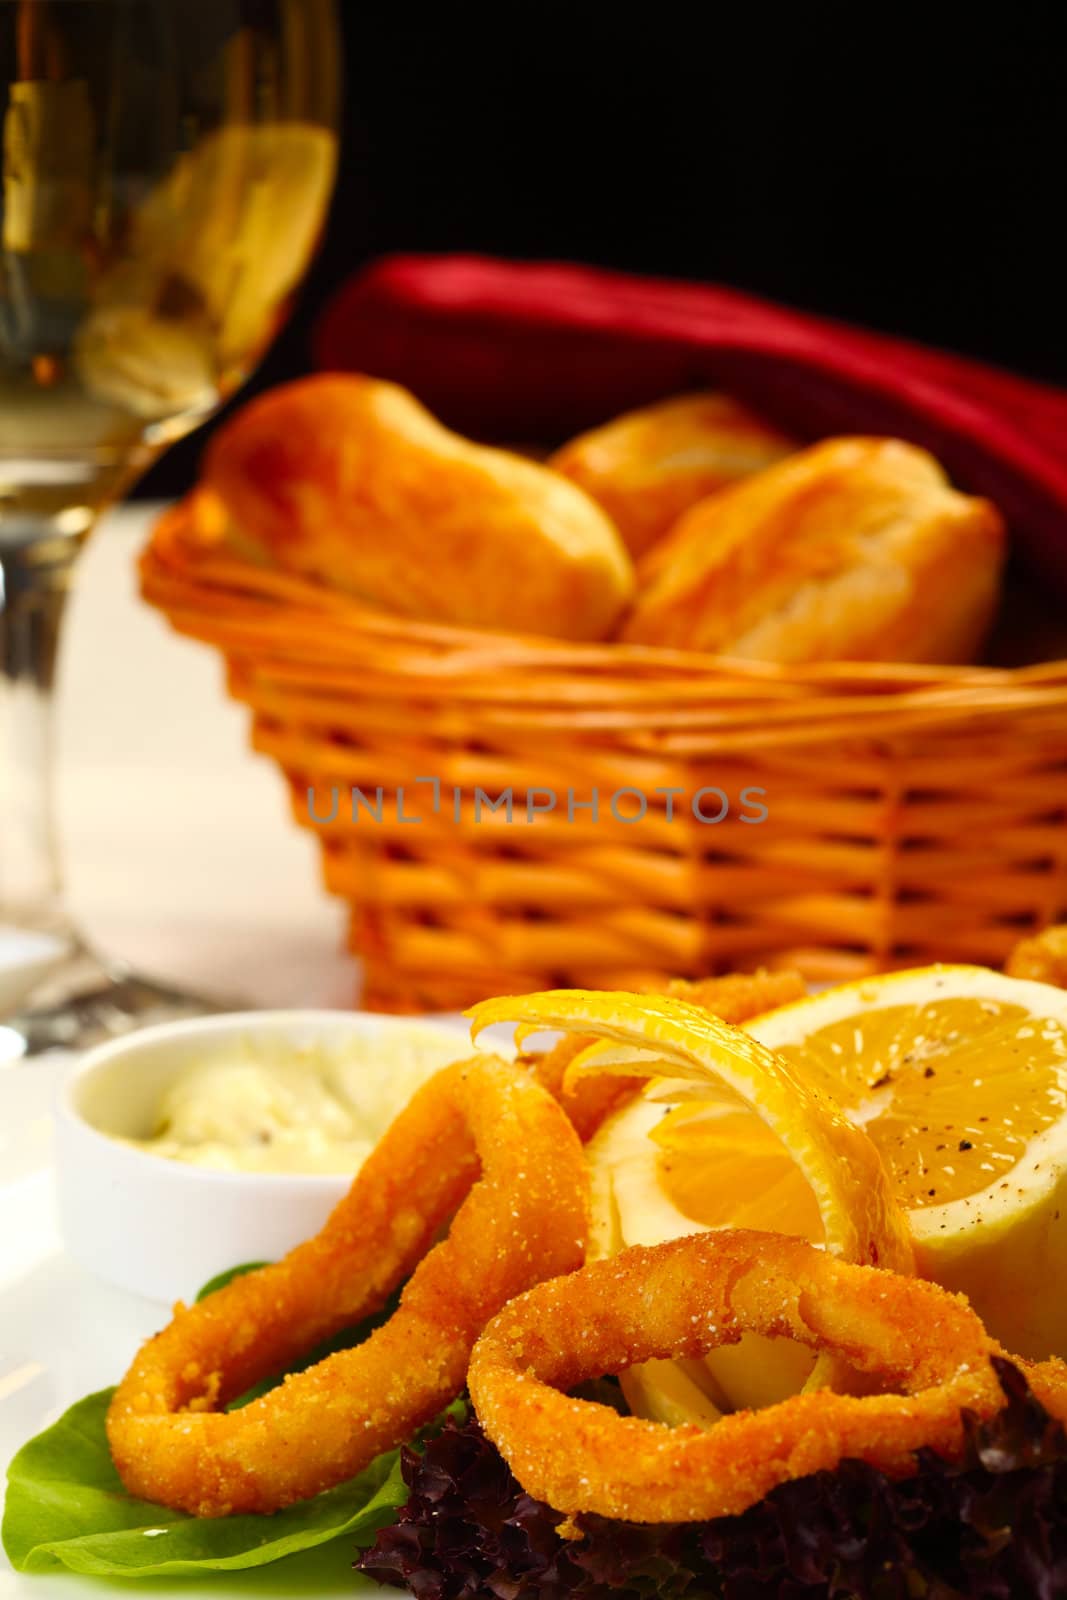 Delicious fried calamars with lemon and salad